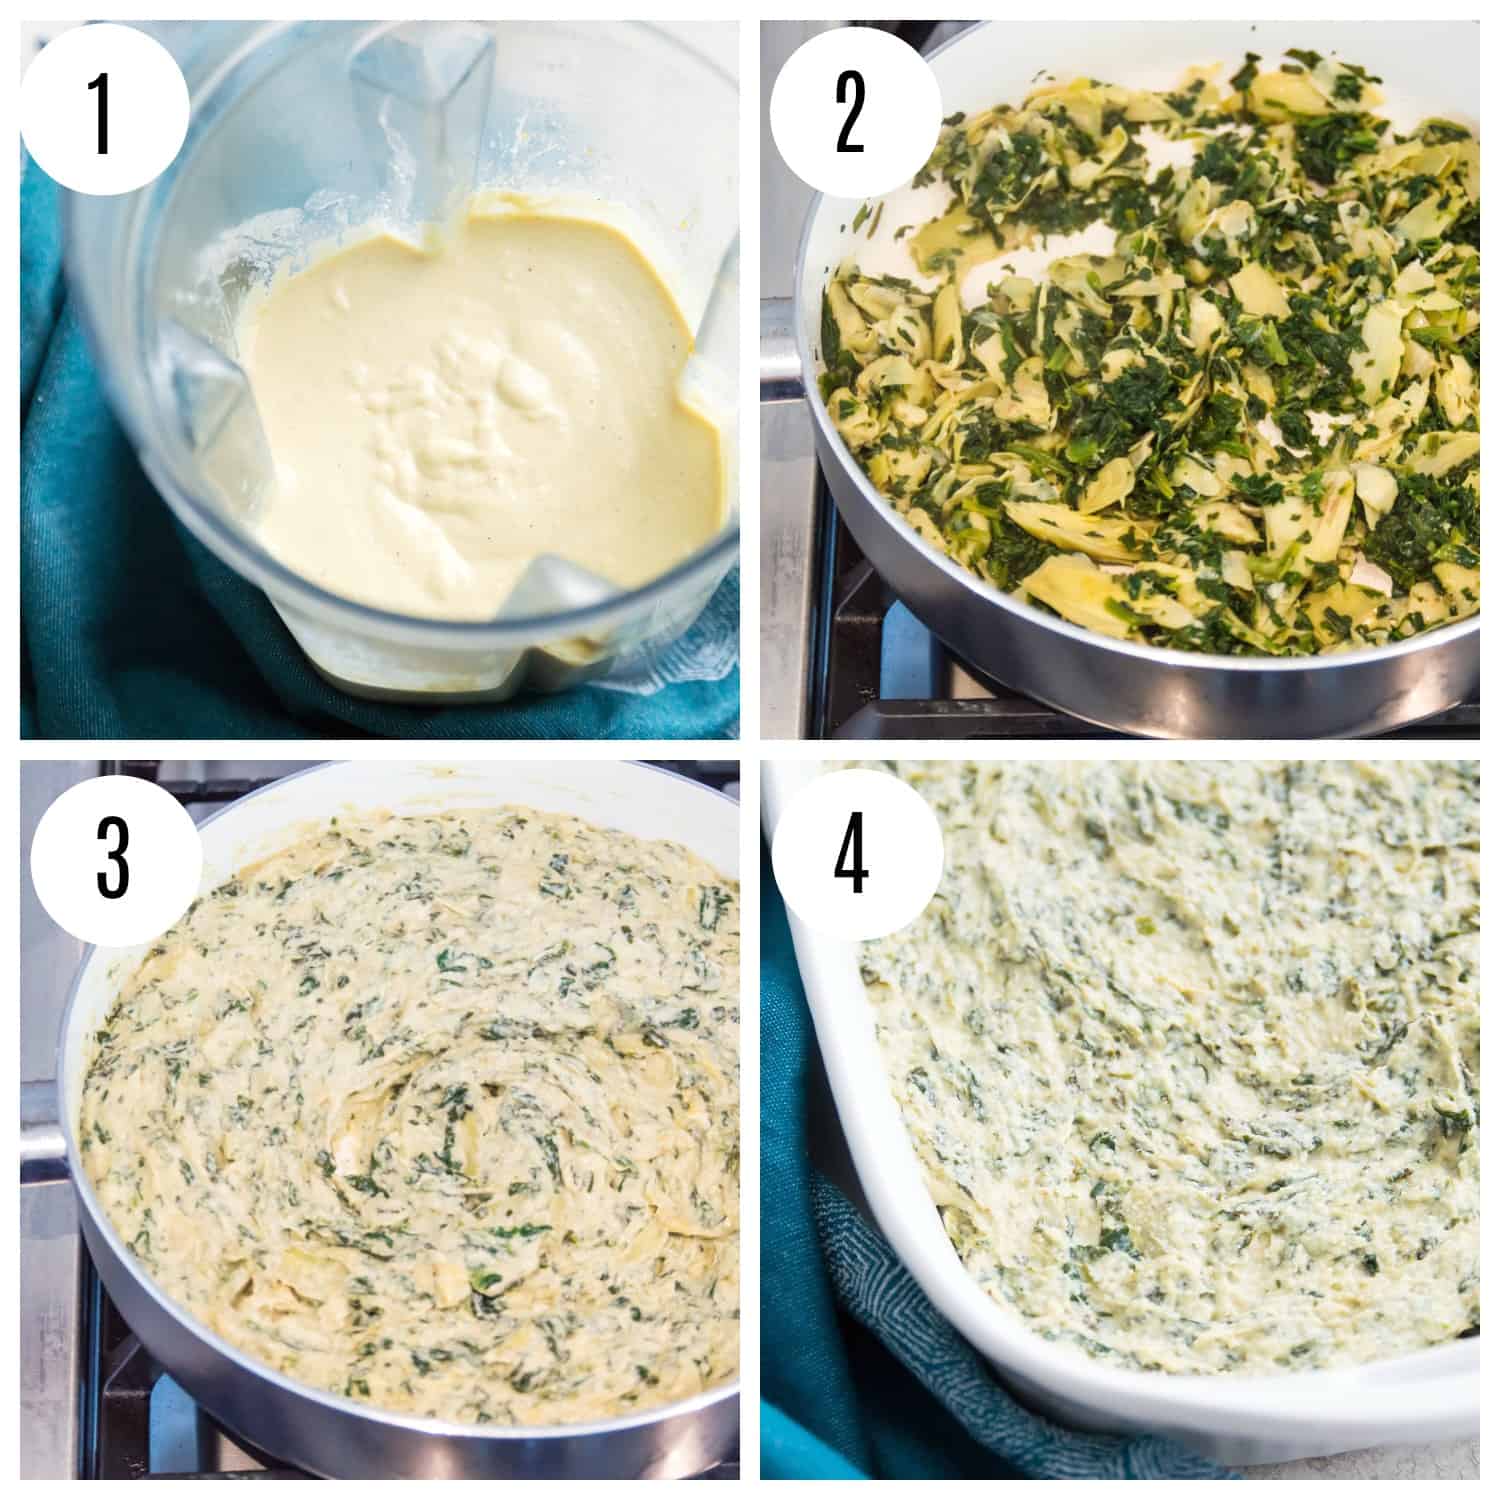 Step by step directions for making a vegan spinach artichoke dip.